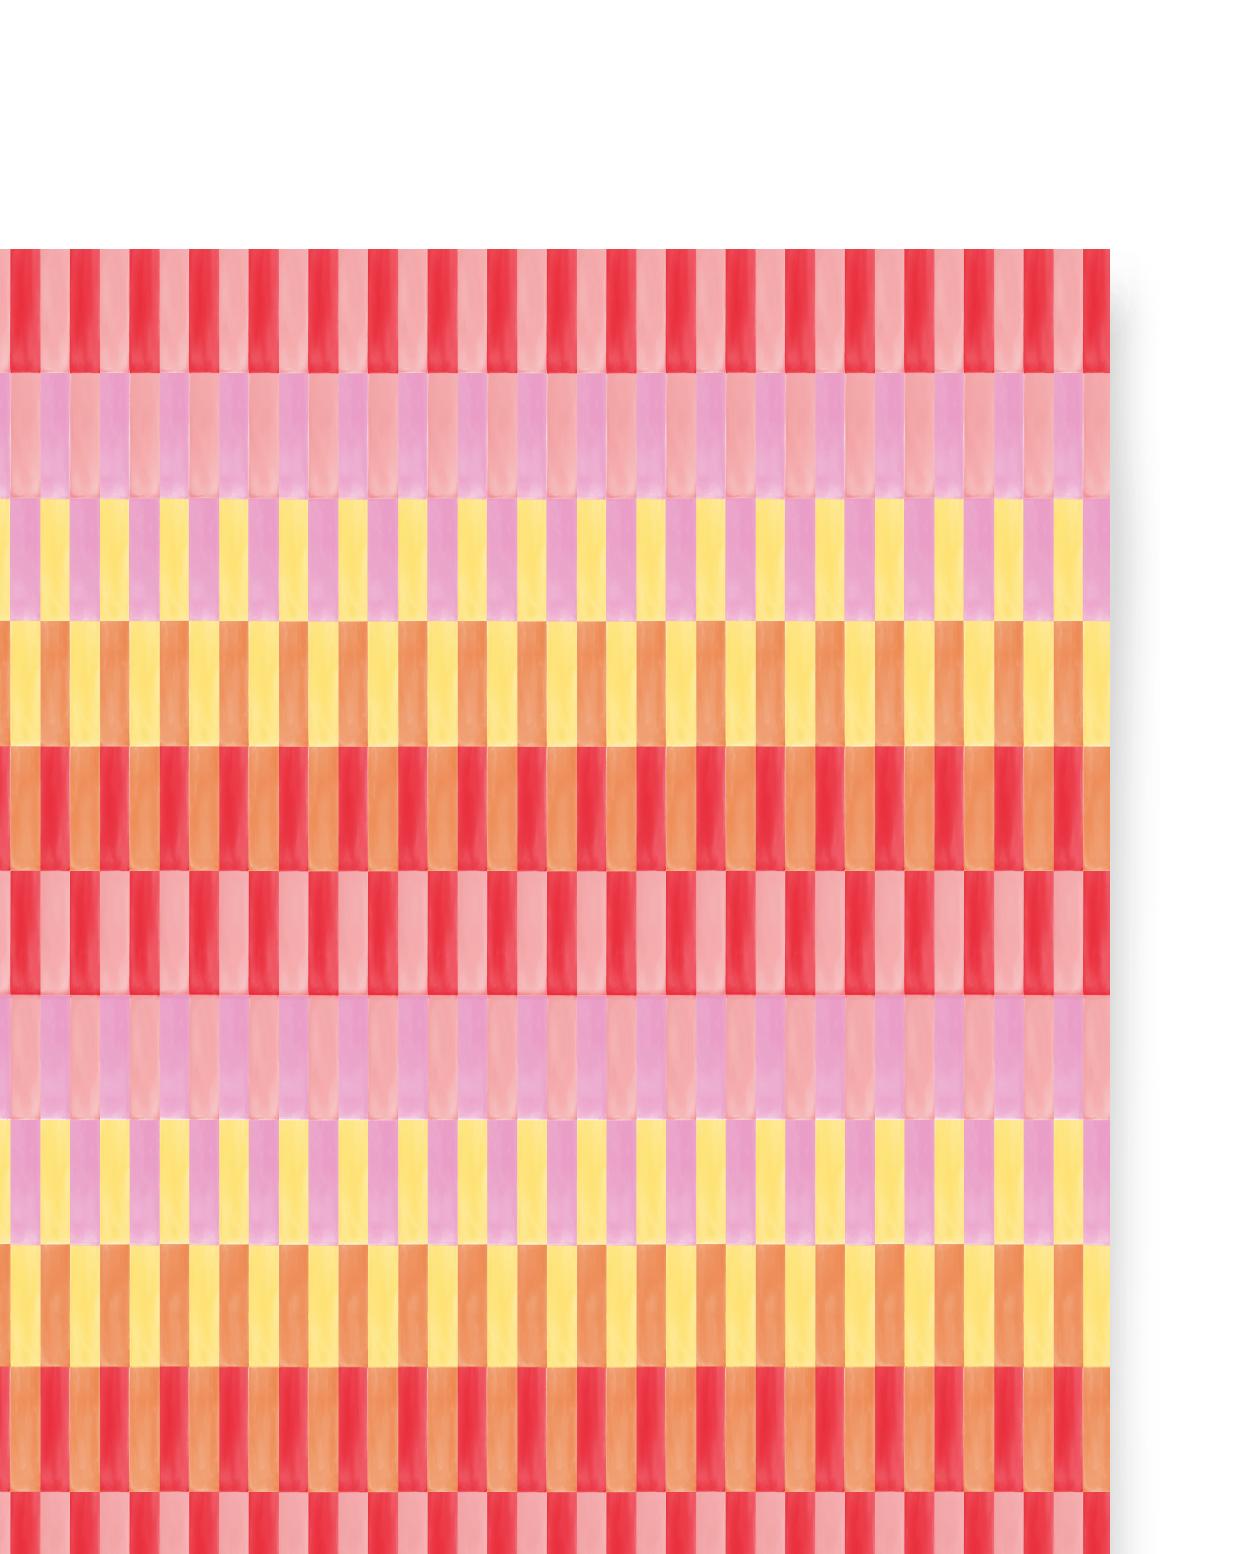 Pink, yellow, red, and orange alternating stripes.